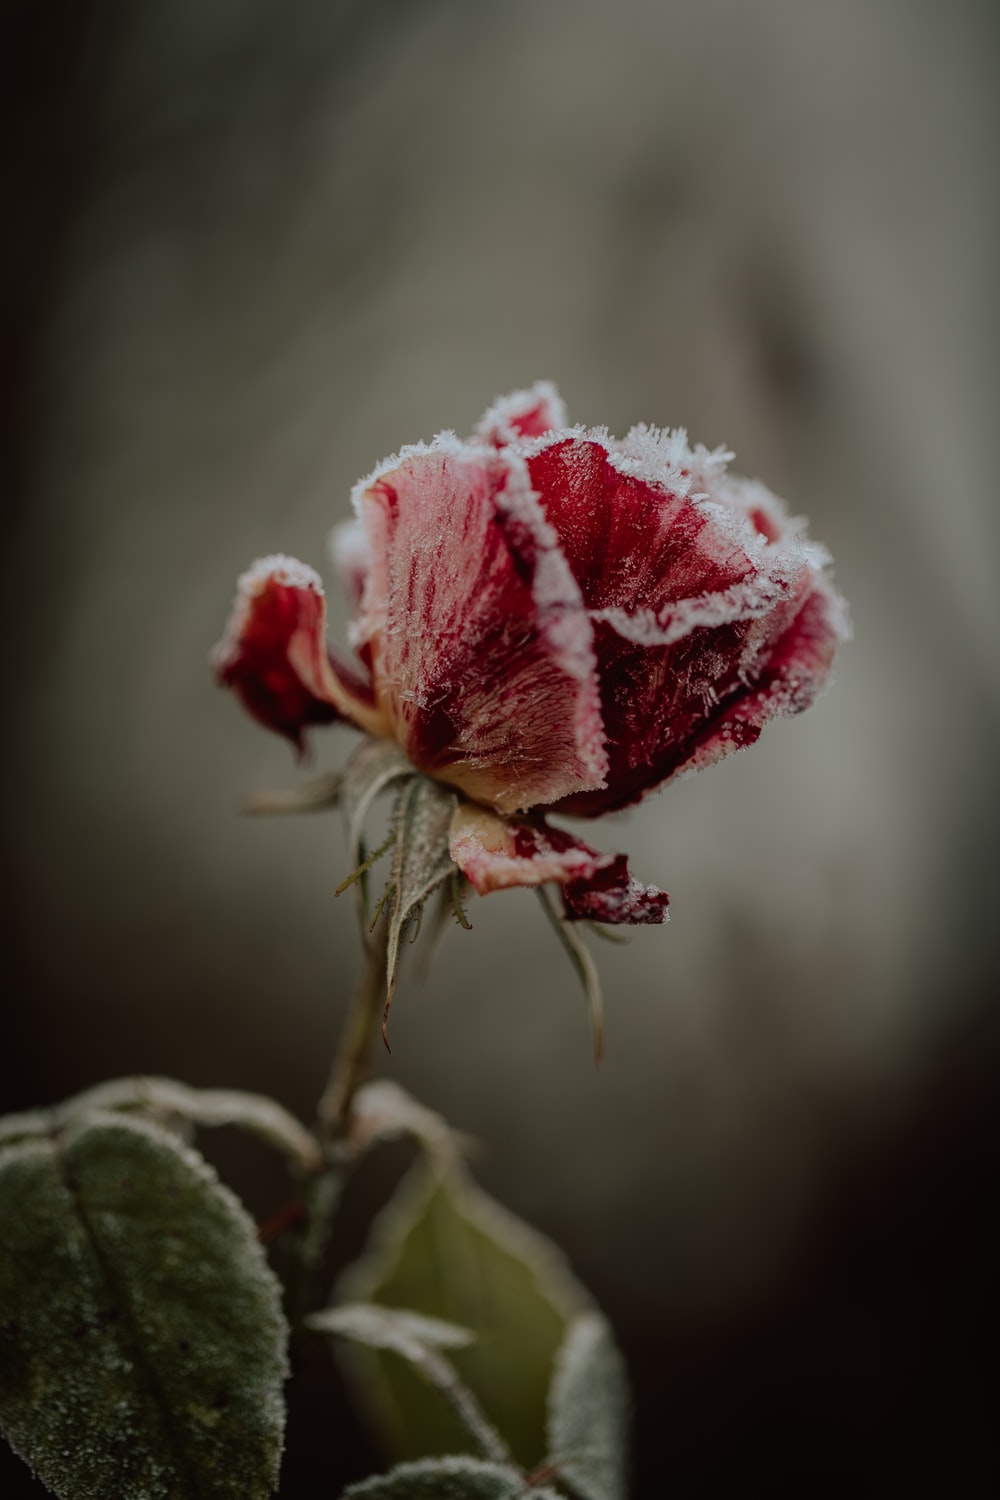 Frozen Flower Picture. Download Free Image